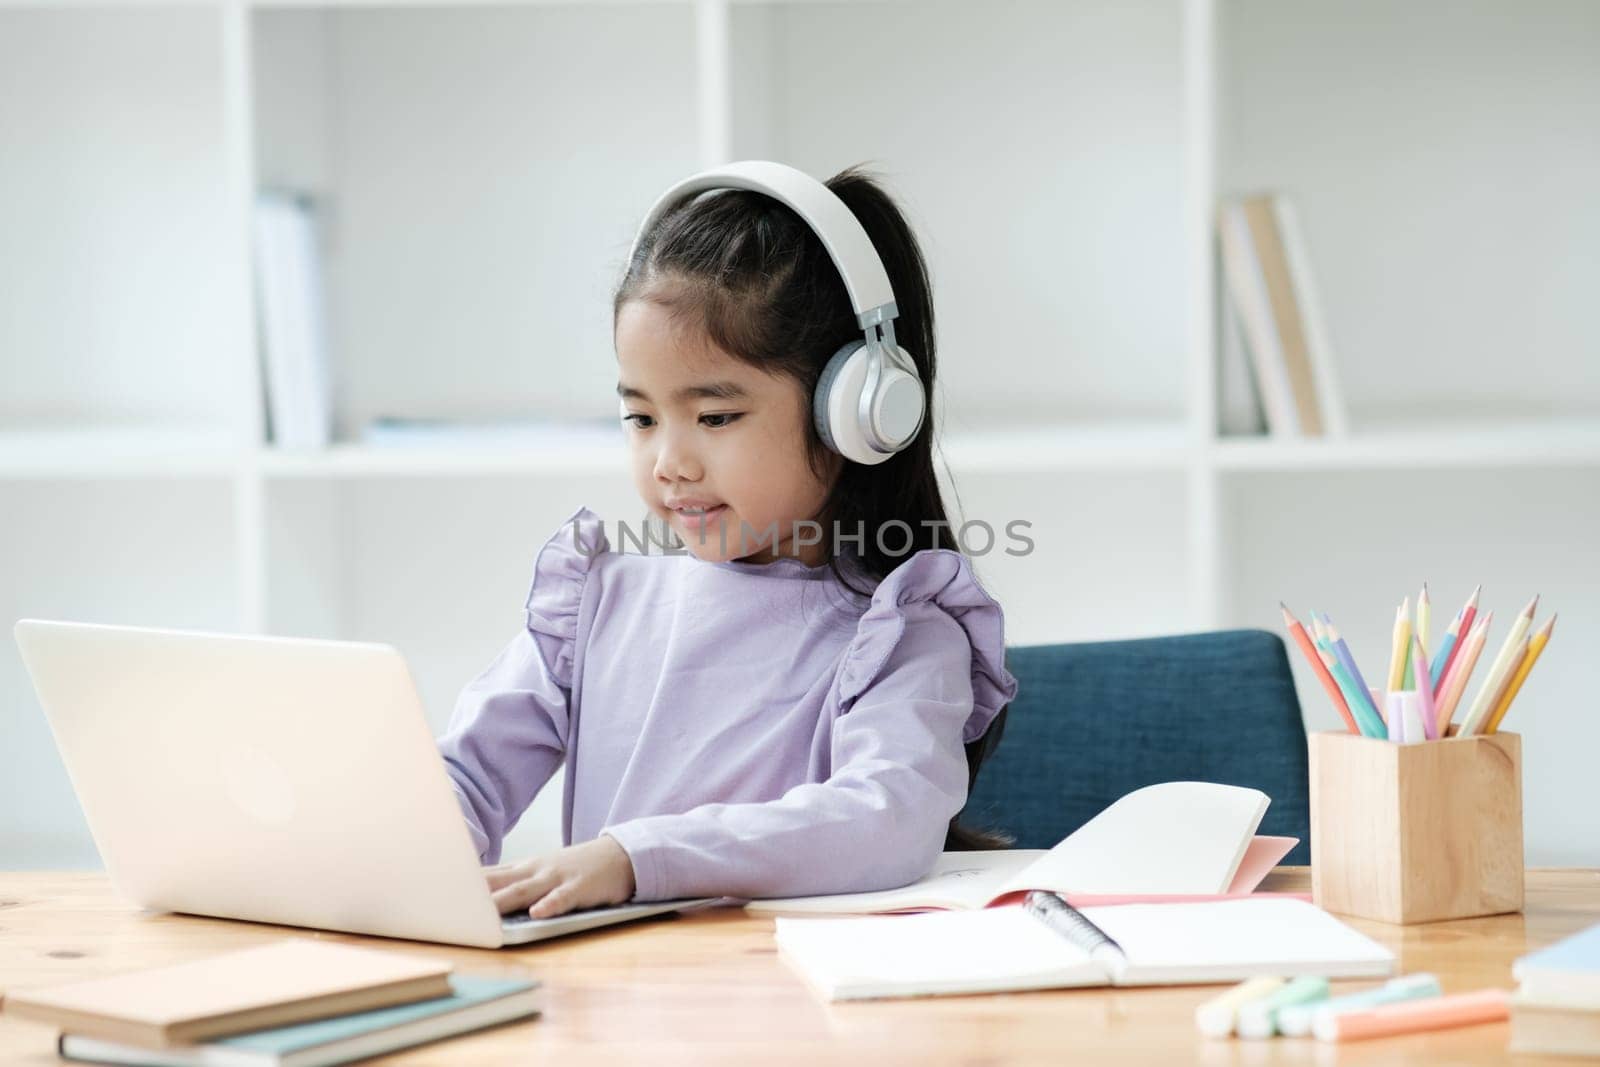 A young girl is sitting at a desk with a laptop and headphones on by ijeab